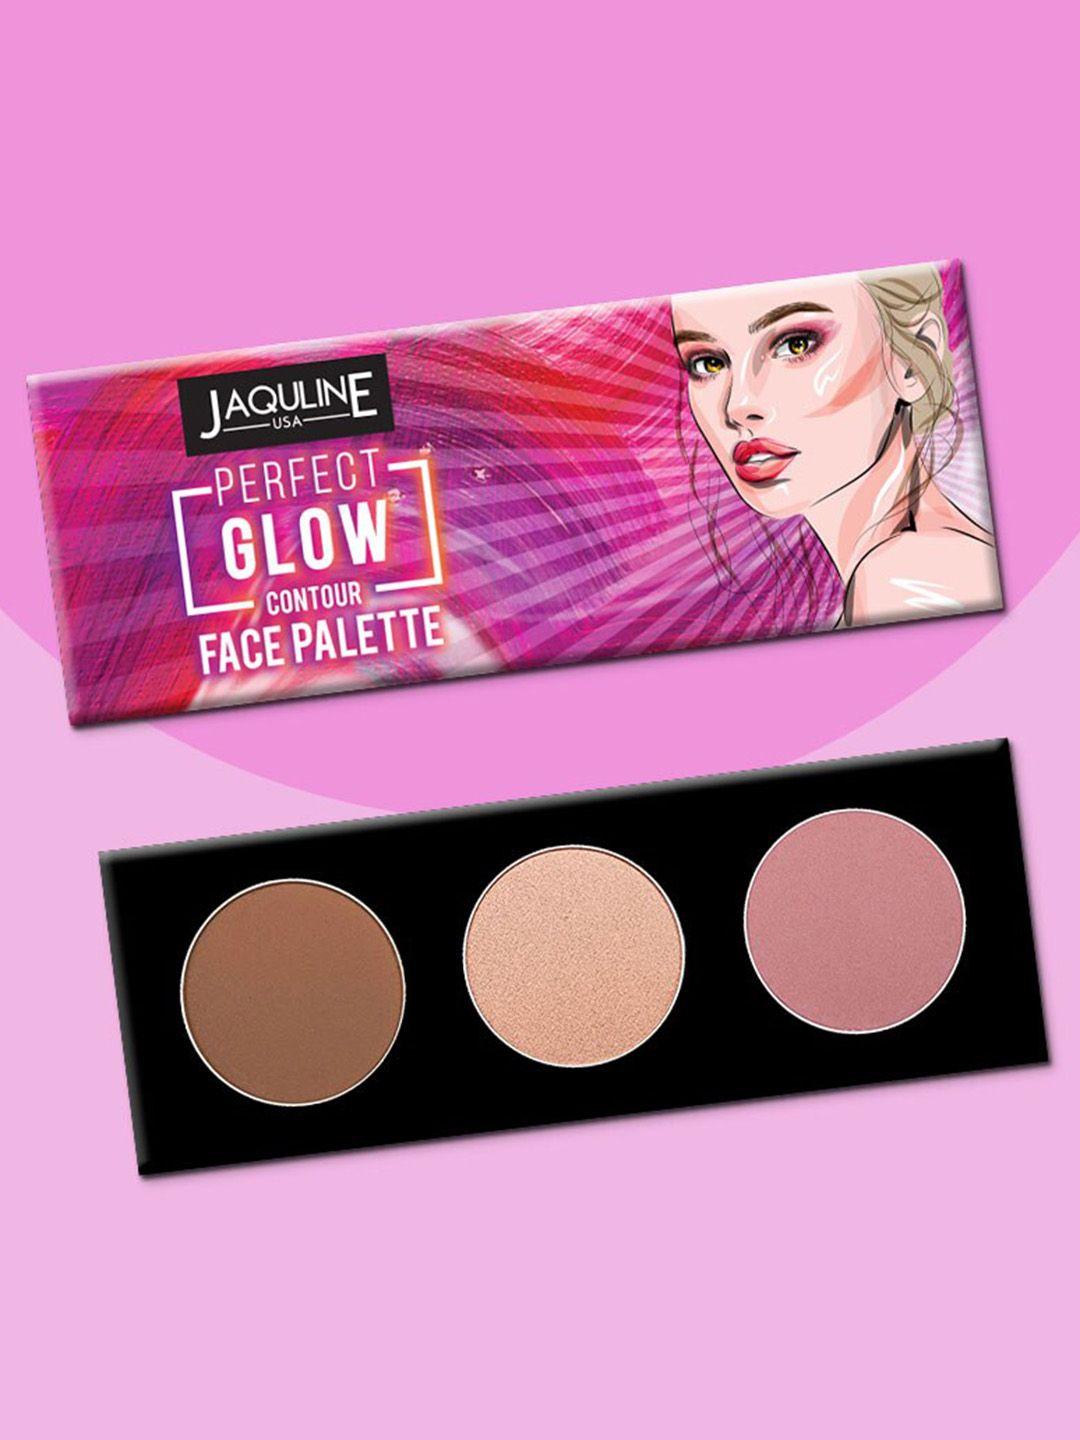 jaquline usa perfect glow 3 in 1 contour face palette 12g - shade 01